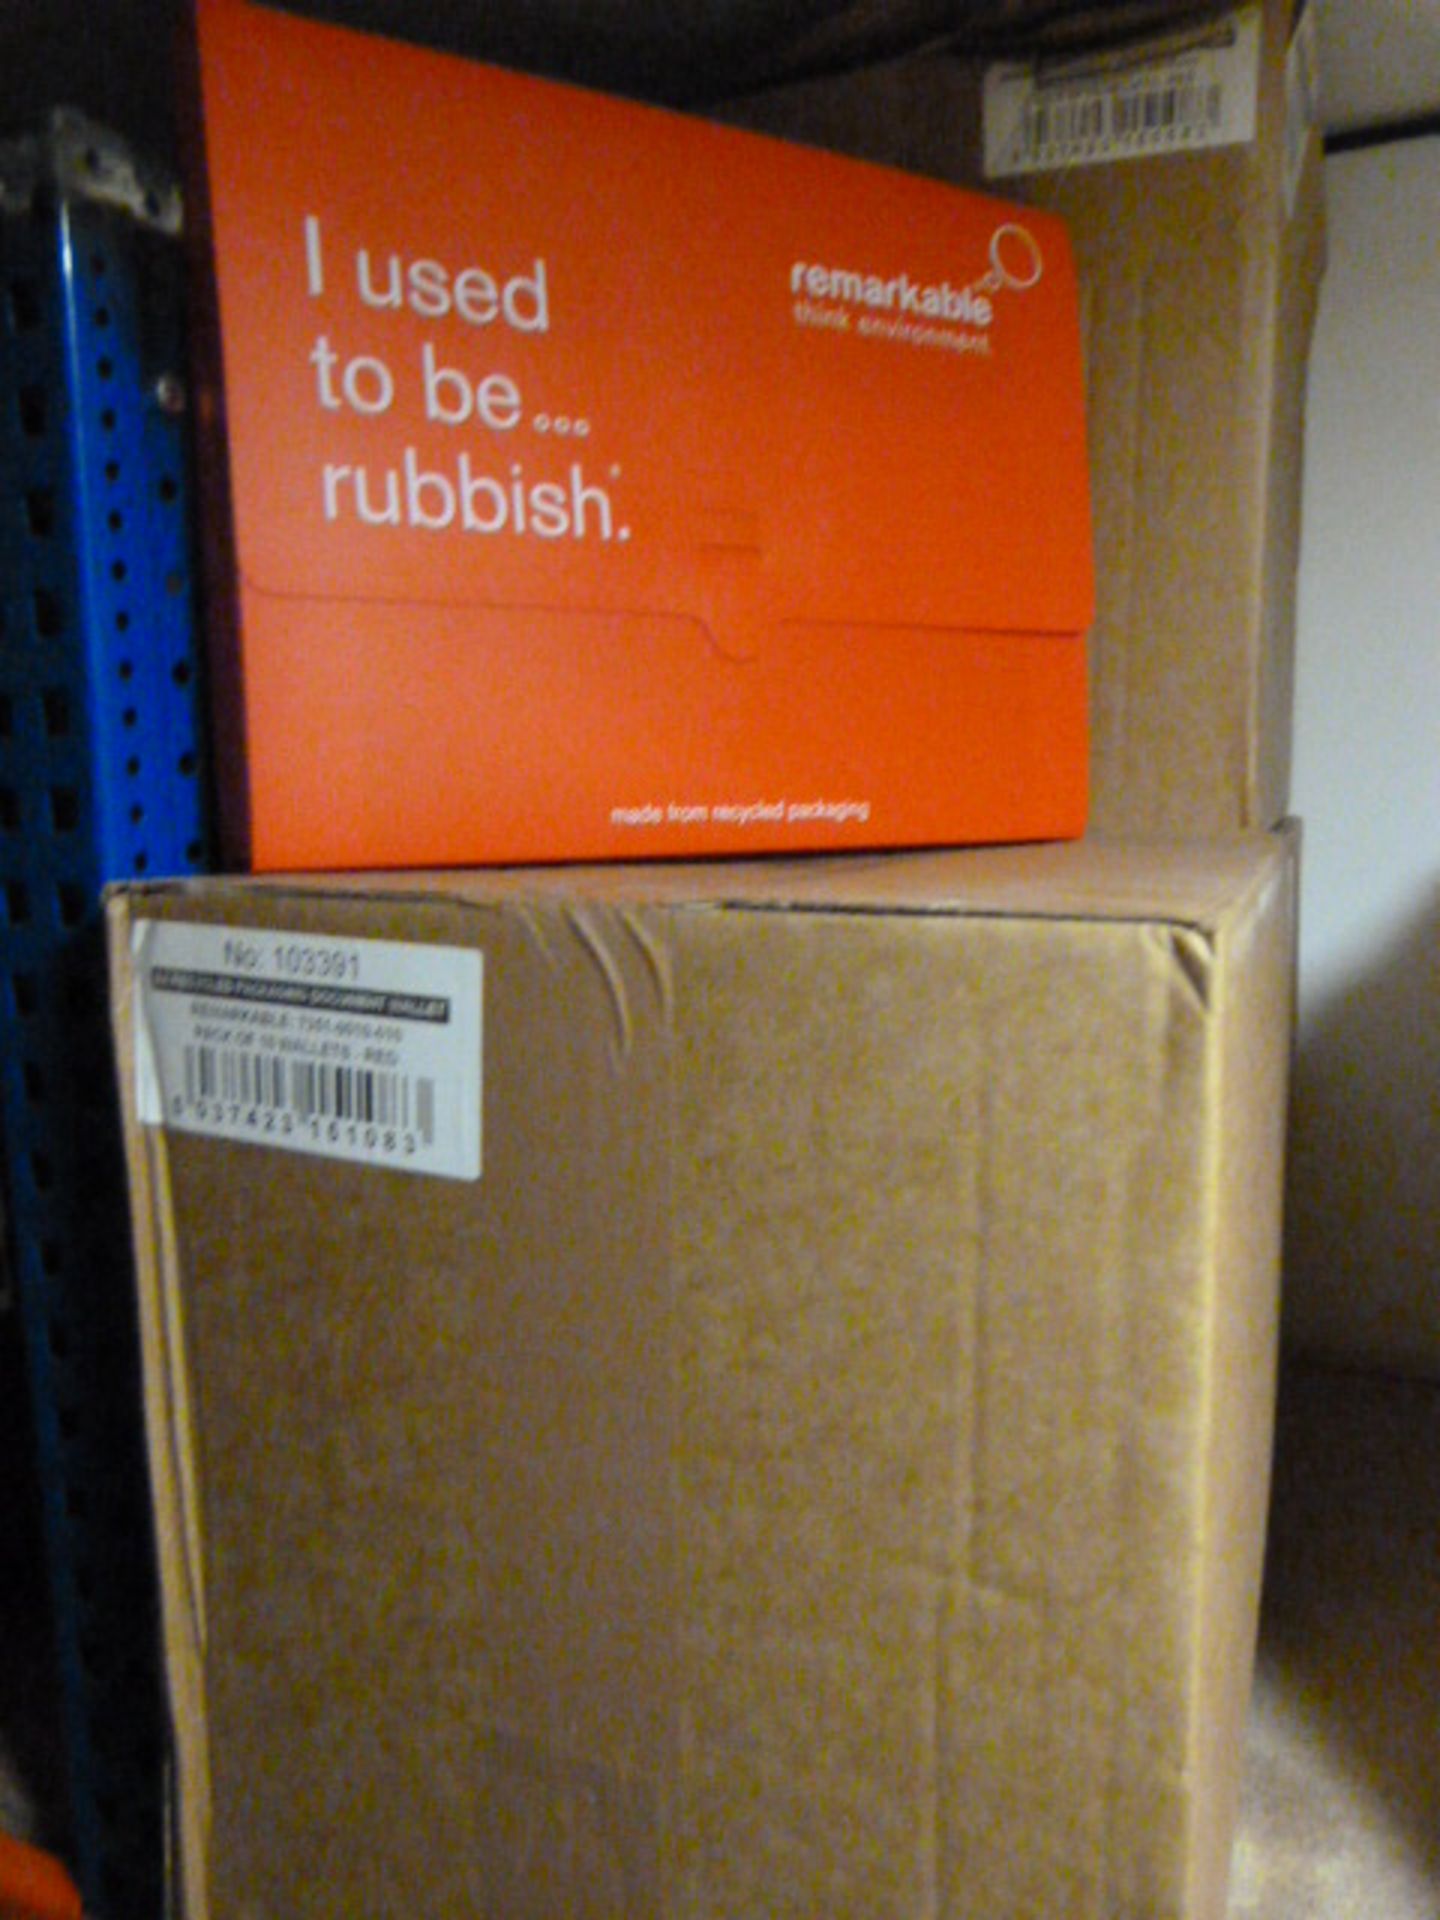 *Three Boxes Containing A4 Recycled Packaging Docu